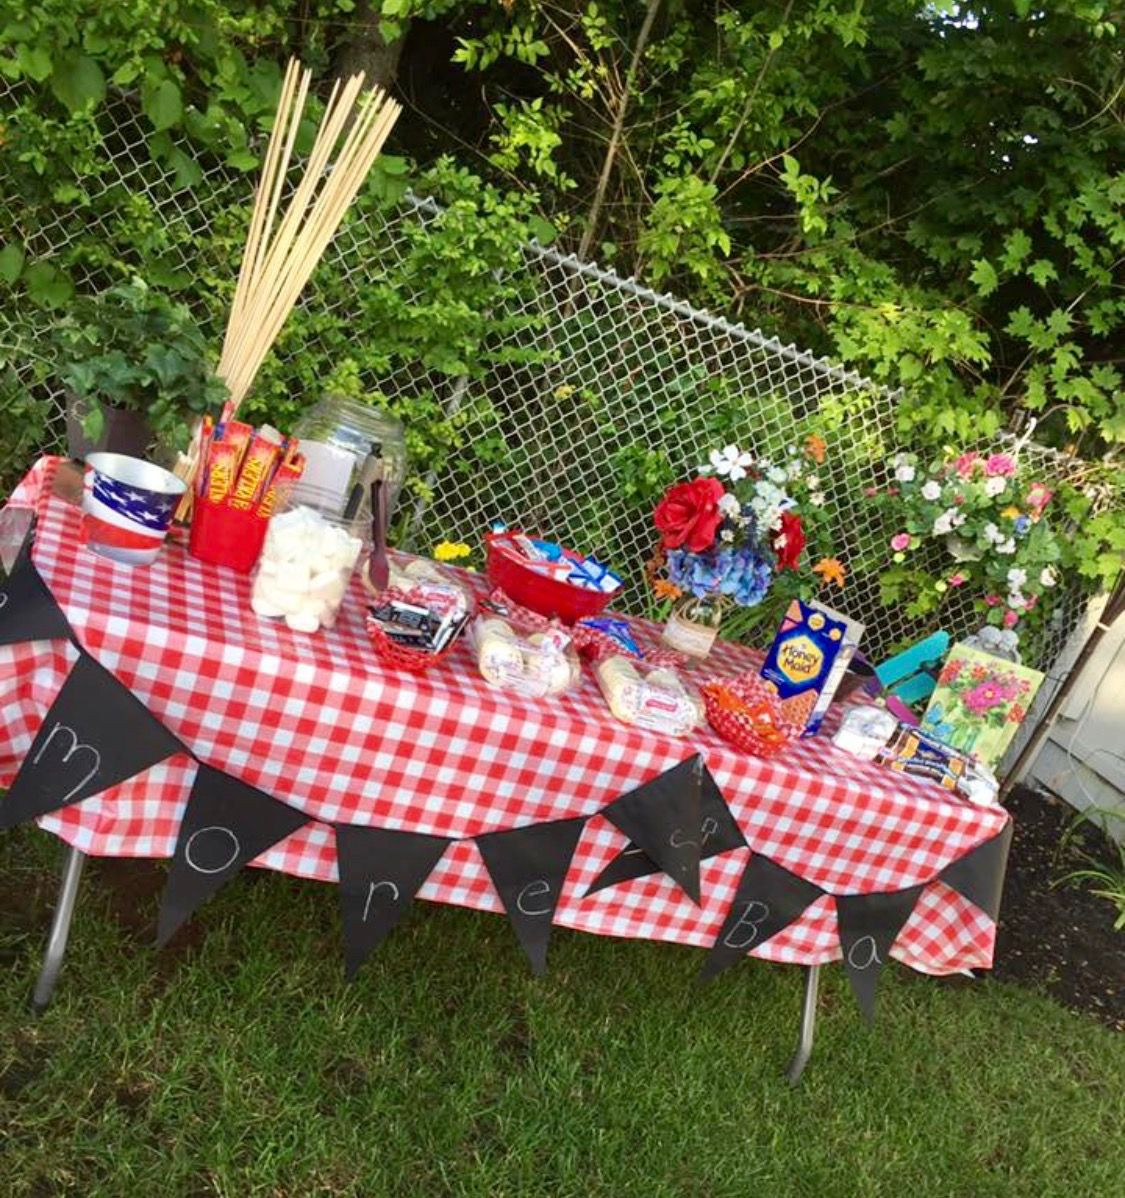 Picnic Graduation Party Ideas
 Pin by Dawn LaCarte on Dawn LaCarte’s Graduation Party